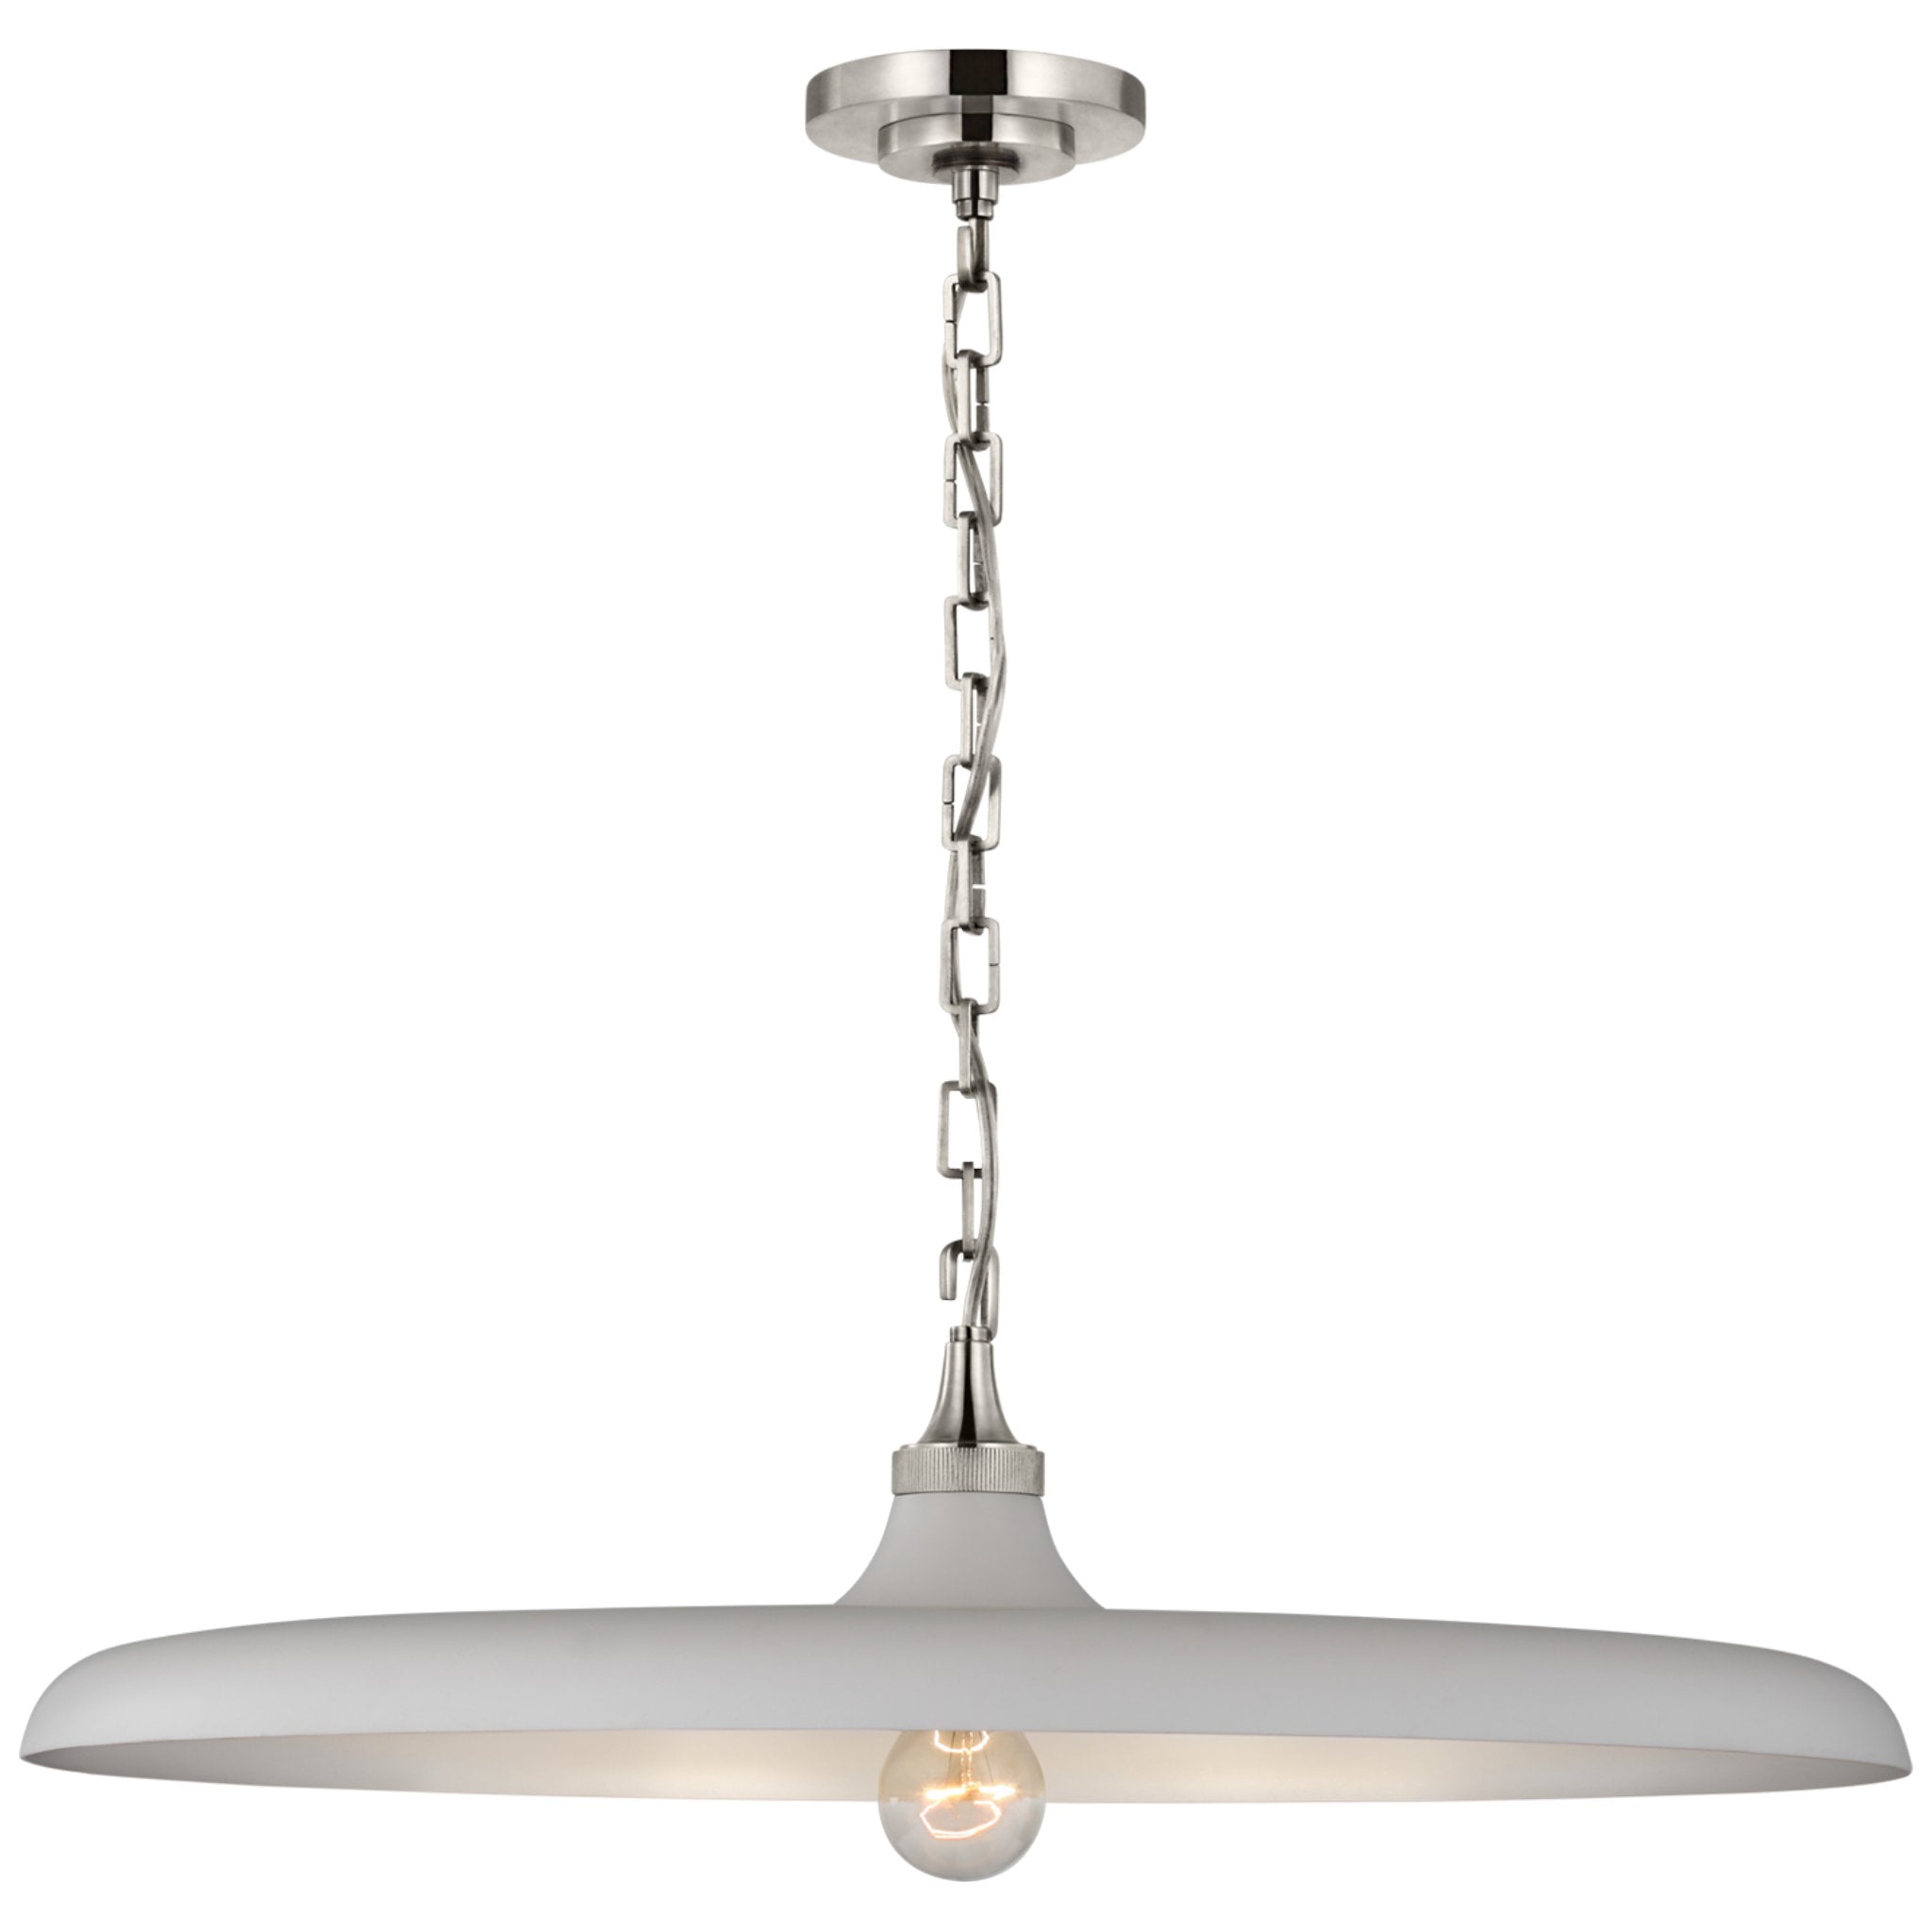 Thomas O'Brien Piatto Large Pendant in Polished Nickel with Plaster White Shade